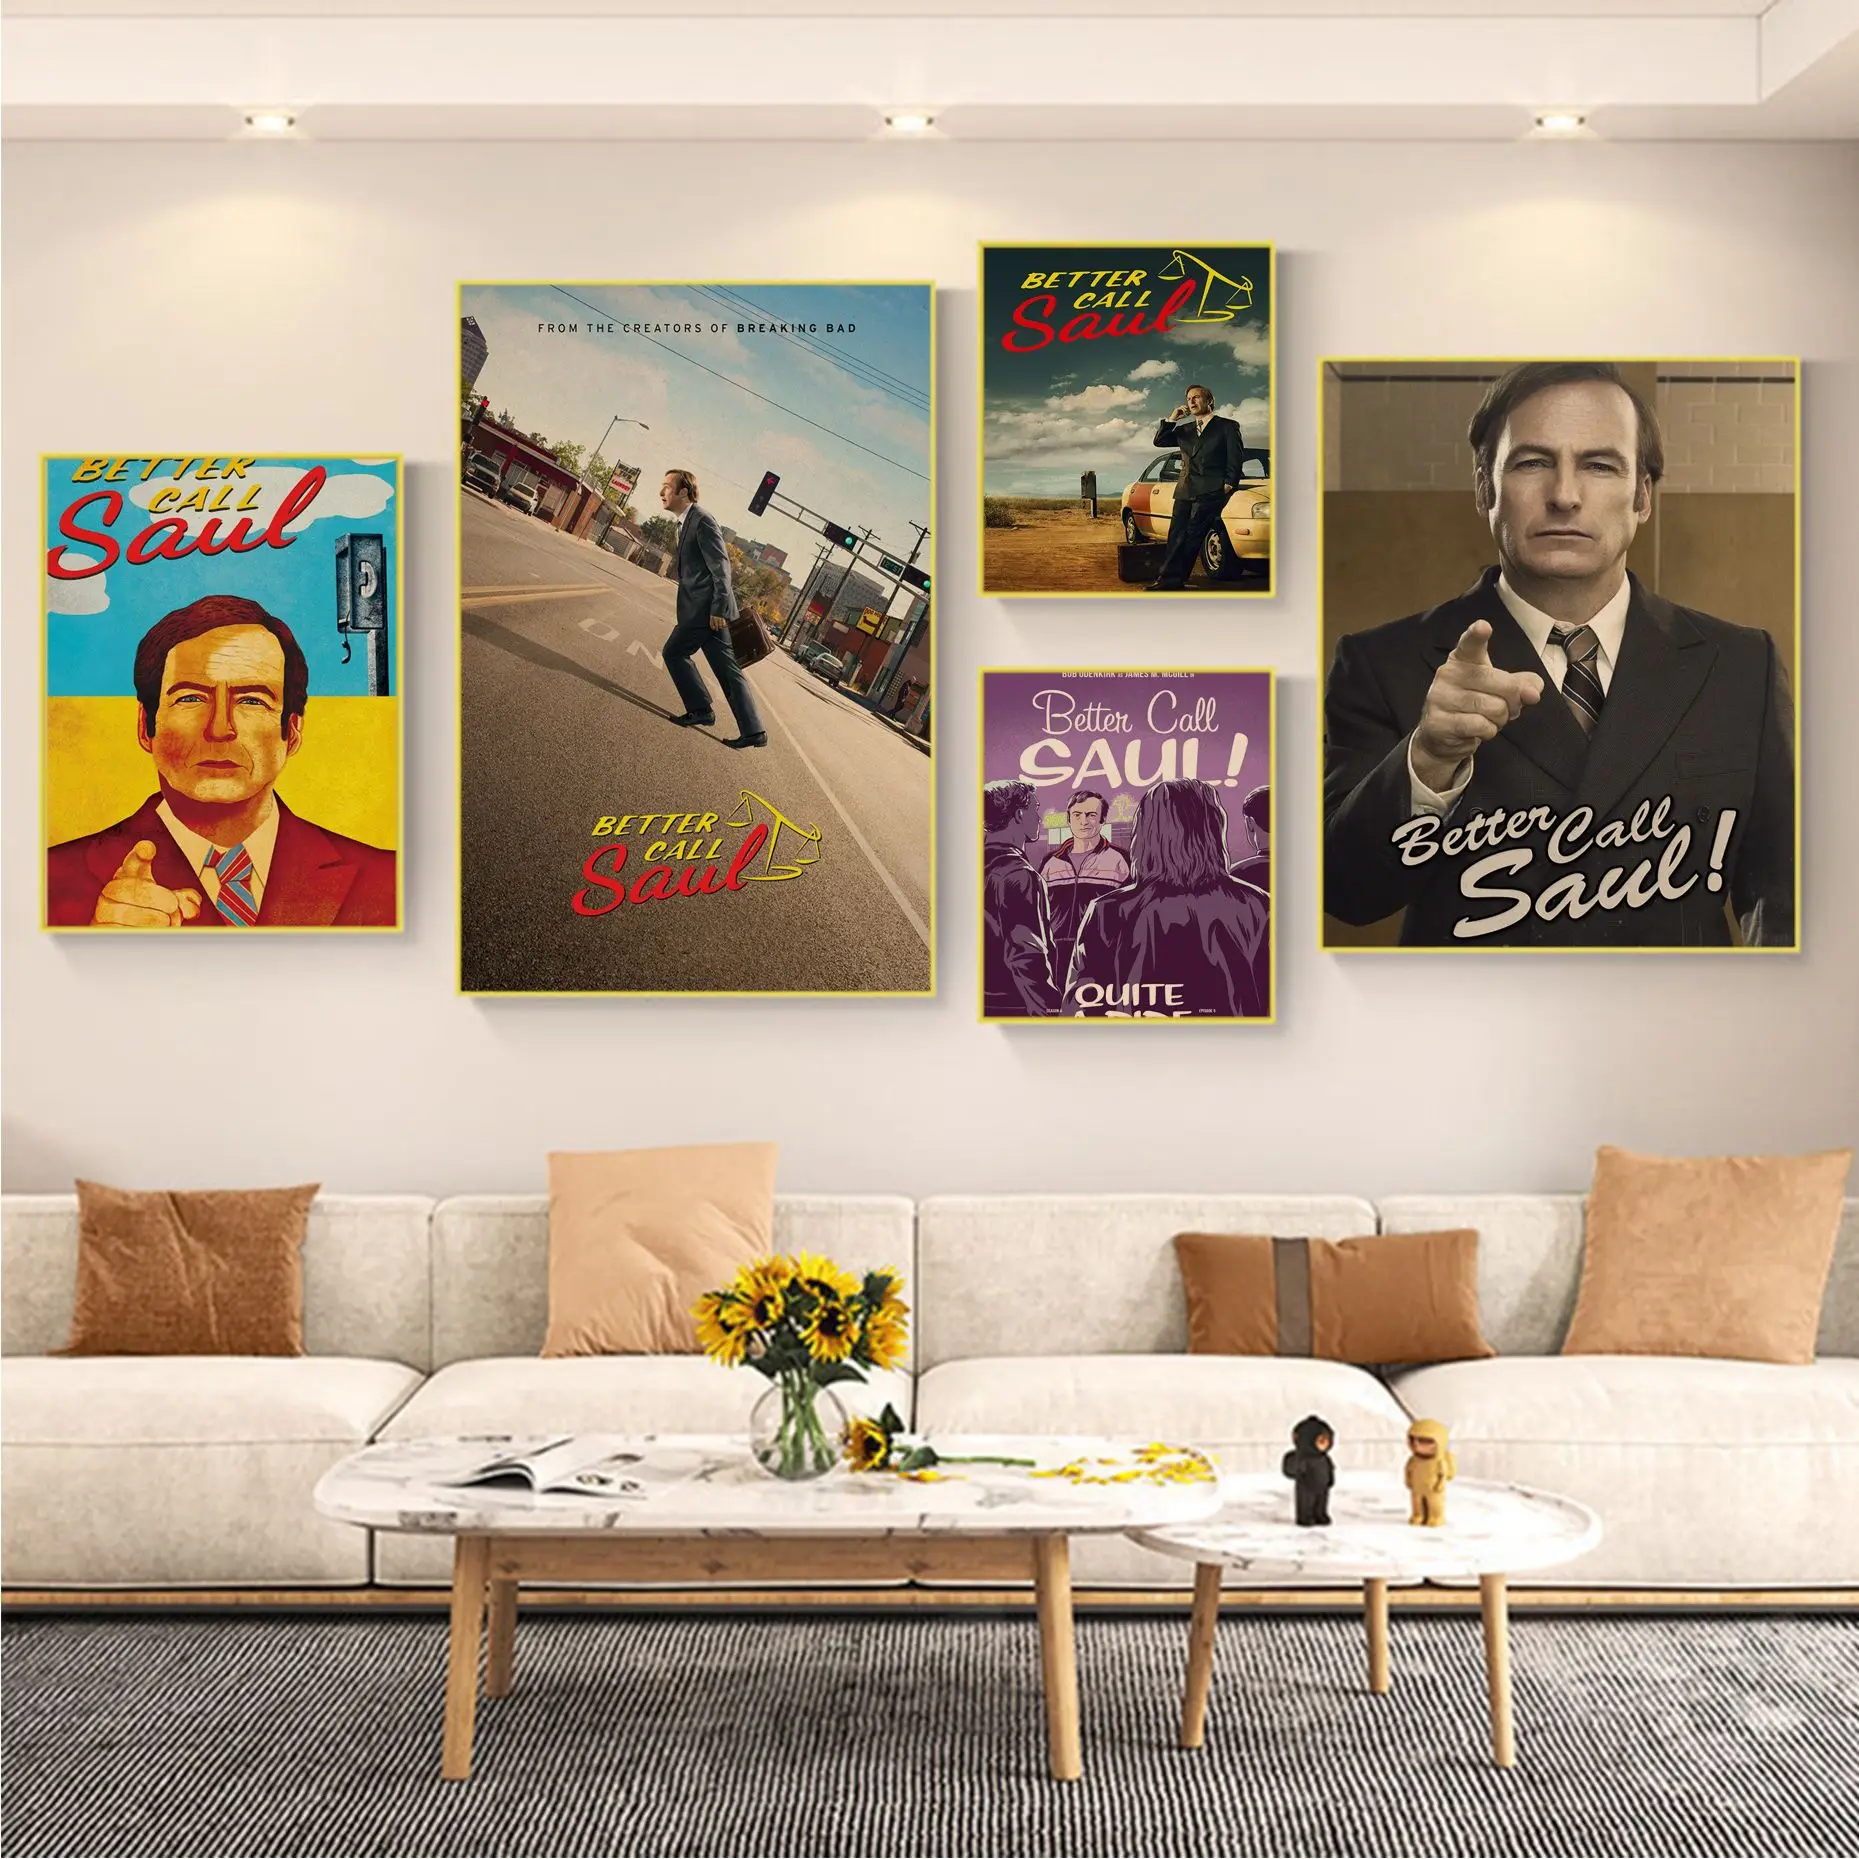 

Better Call Saul Goodman Movie Posters Vintage Room Home Bar Cafe Decor Stickers Wall Painting